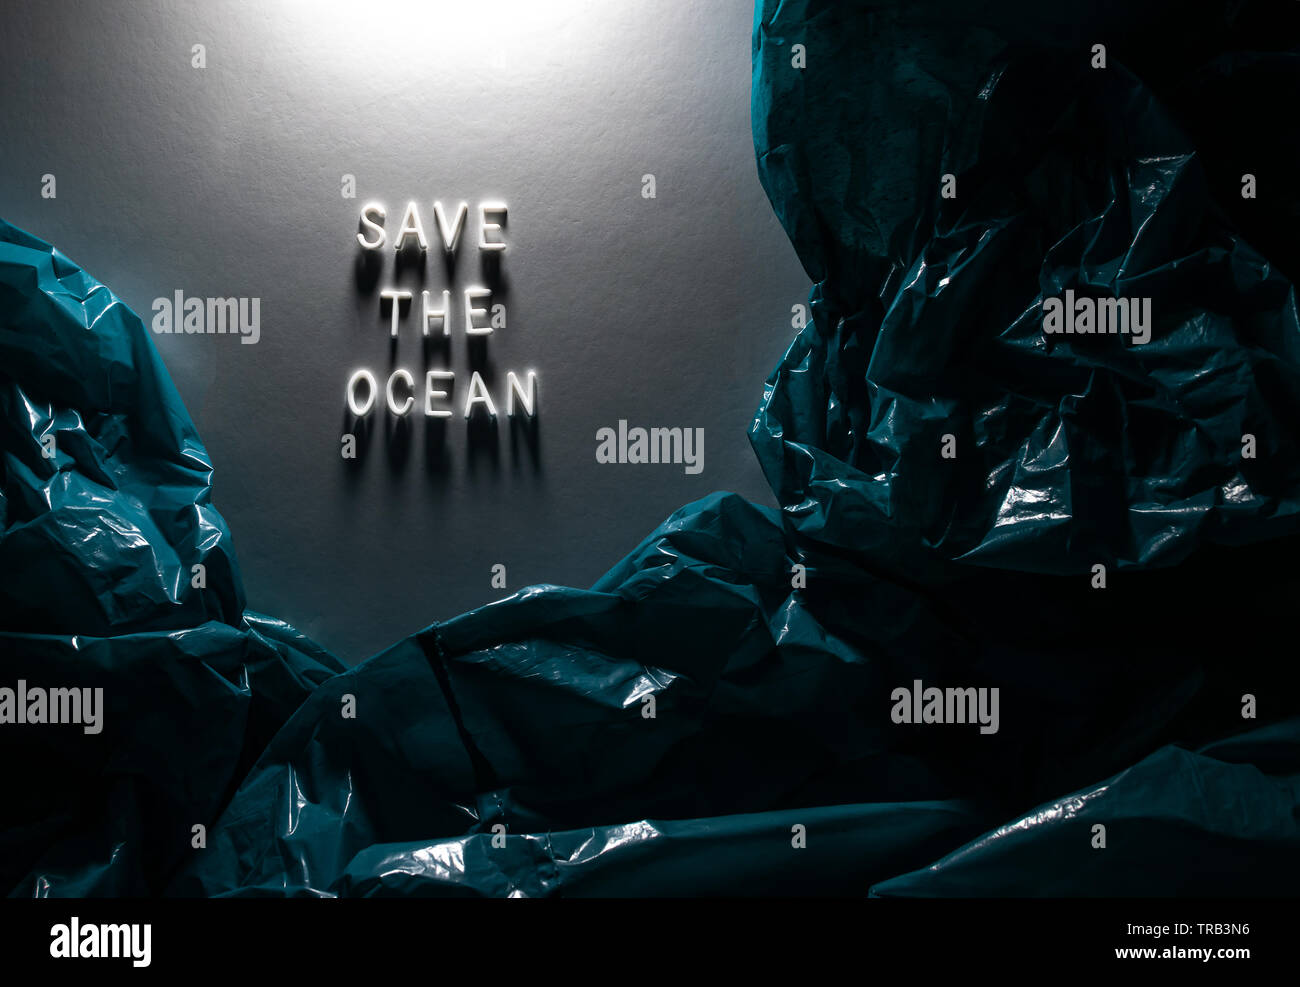 Text 'SAVE THE OCEAN' on white background lightened from above, among blue plastic bags representing ocean.Creative concept of ocean plastic pollution Stock Photo